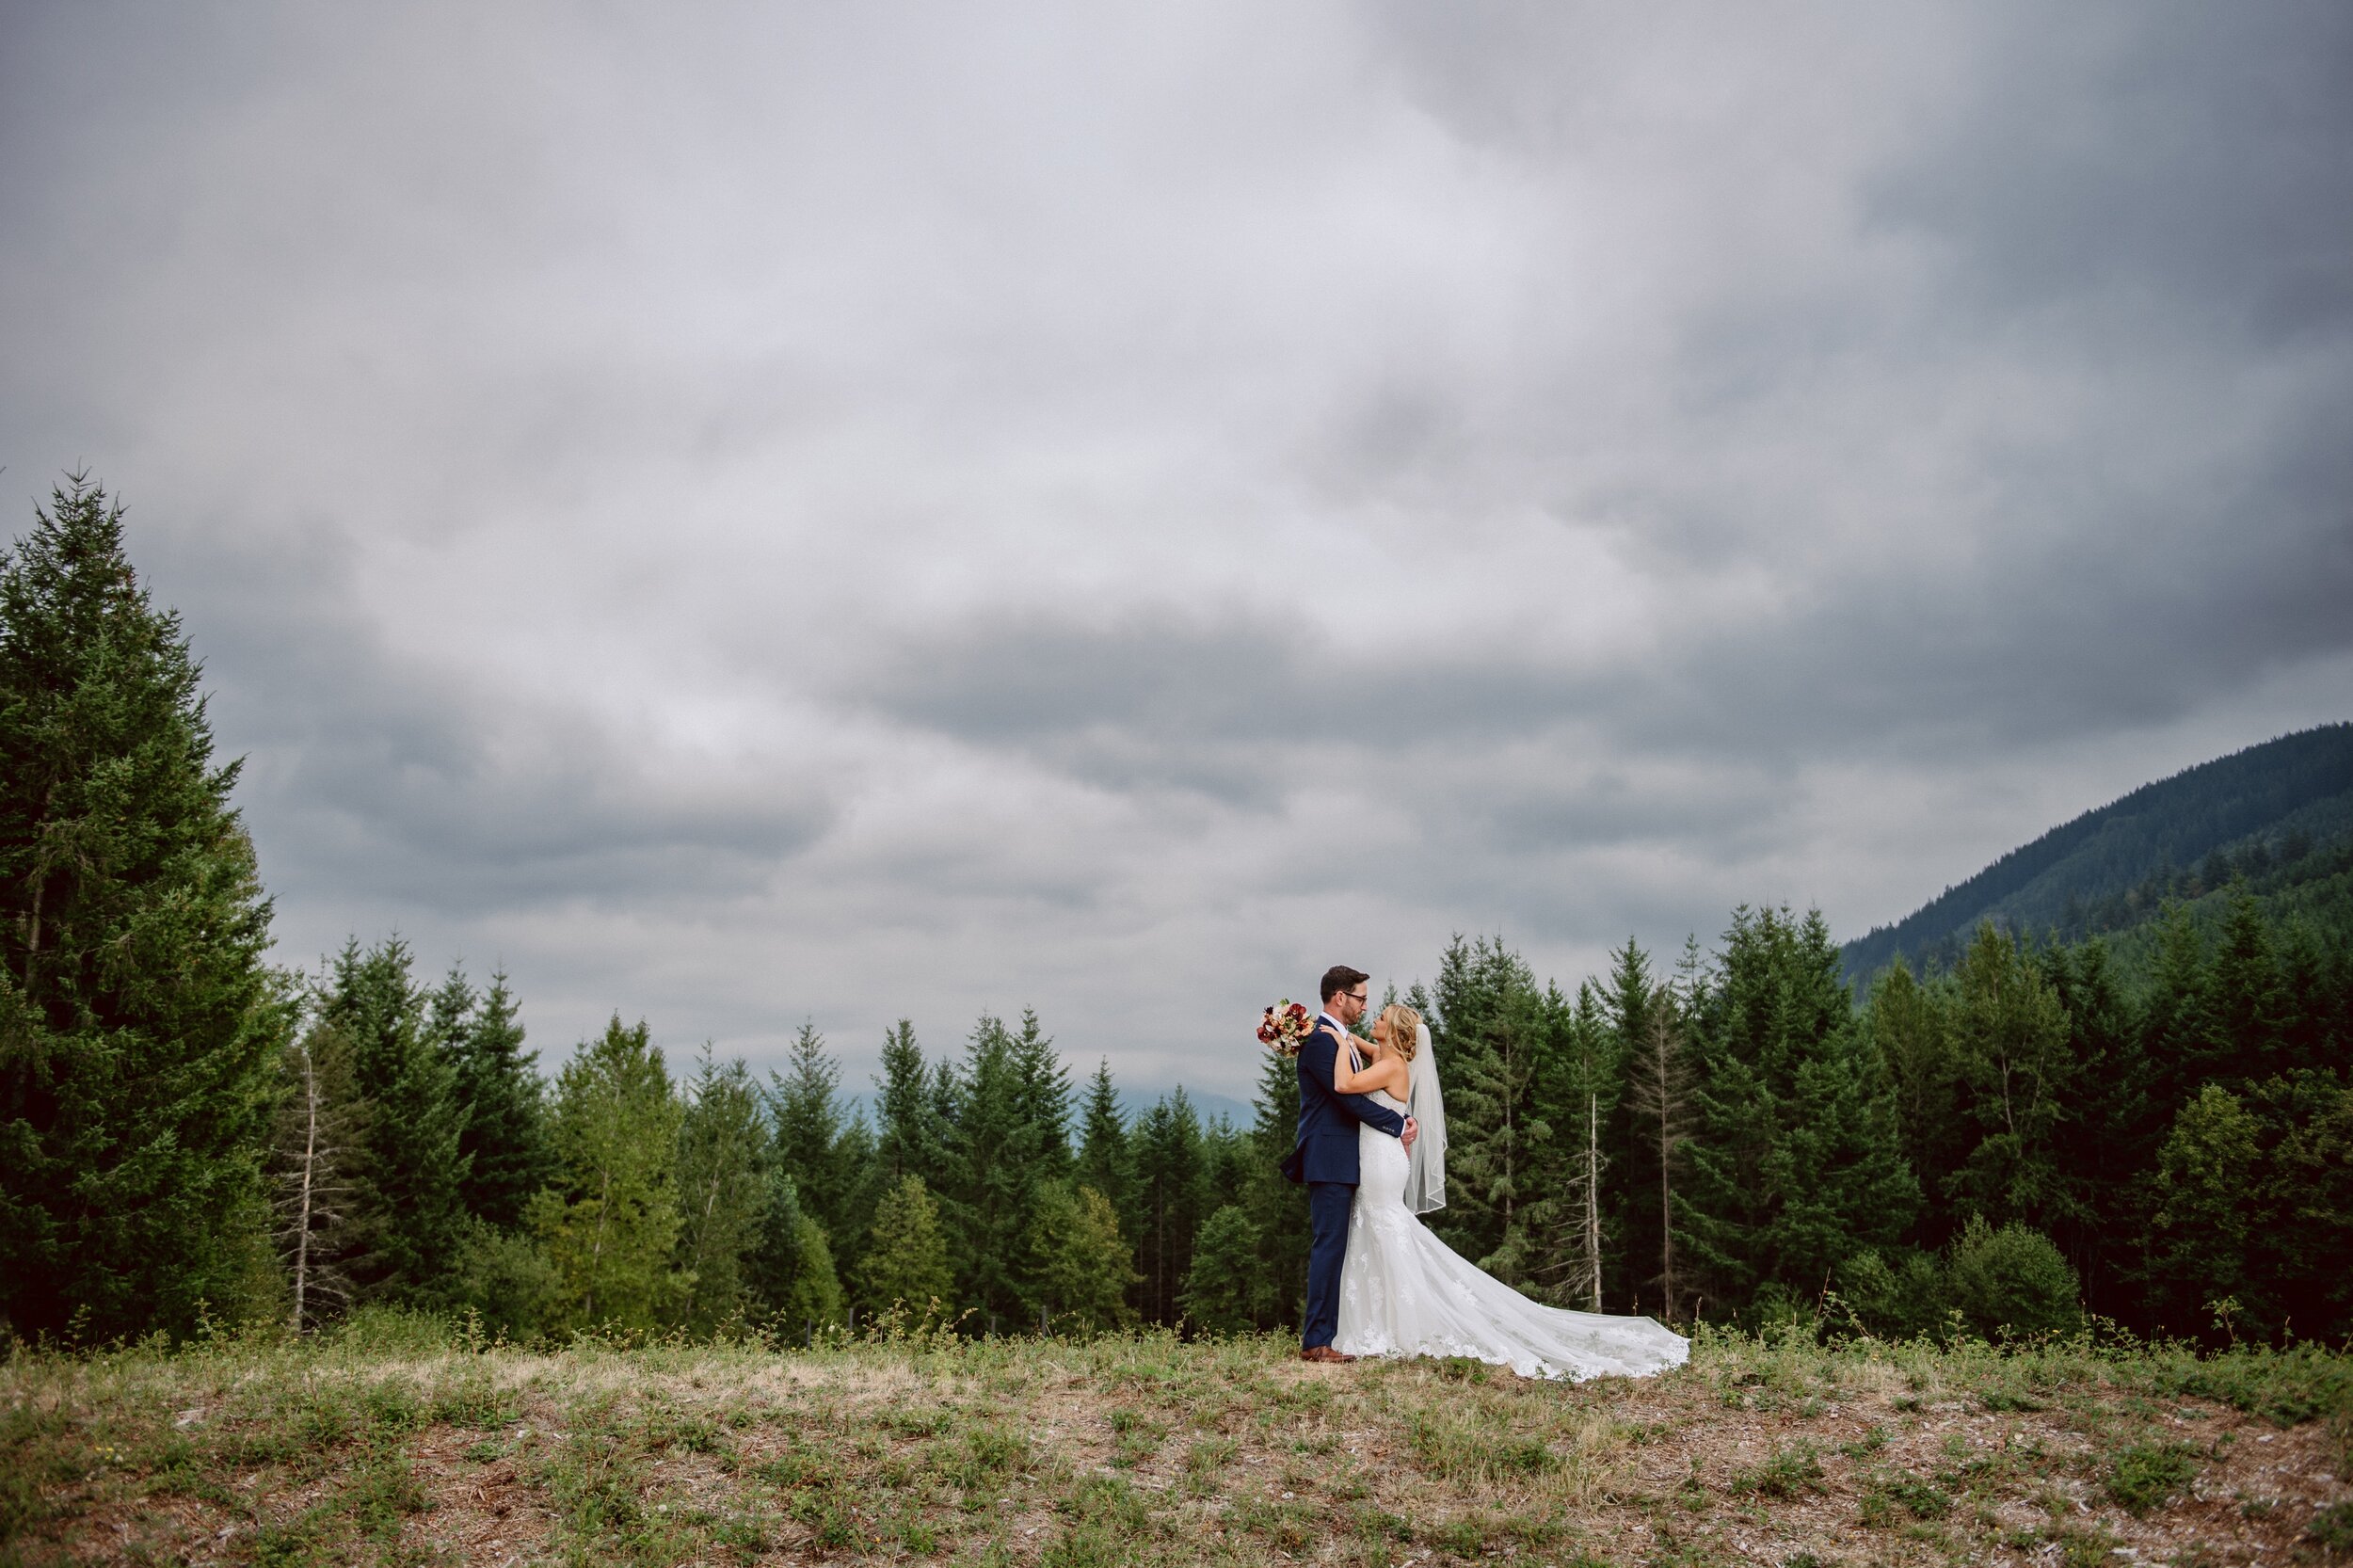 Bride and groom embrace on a hill with a forest and stormy sky behind them